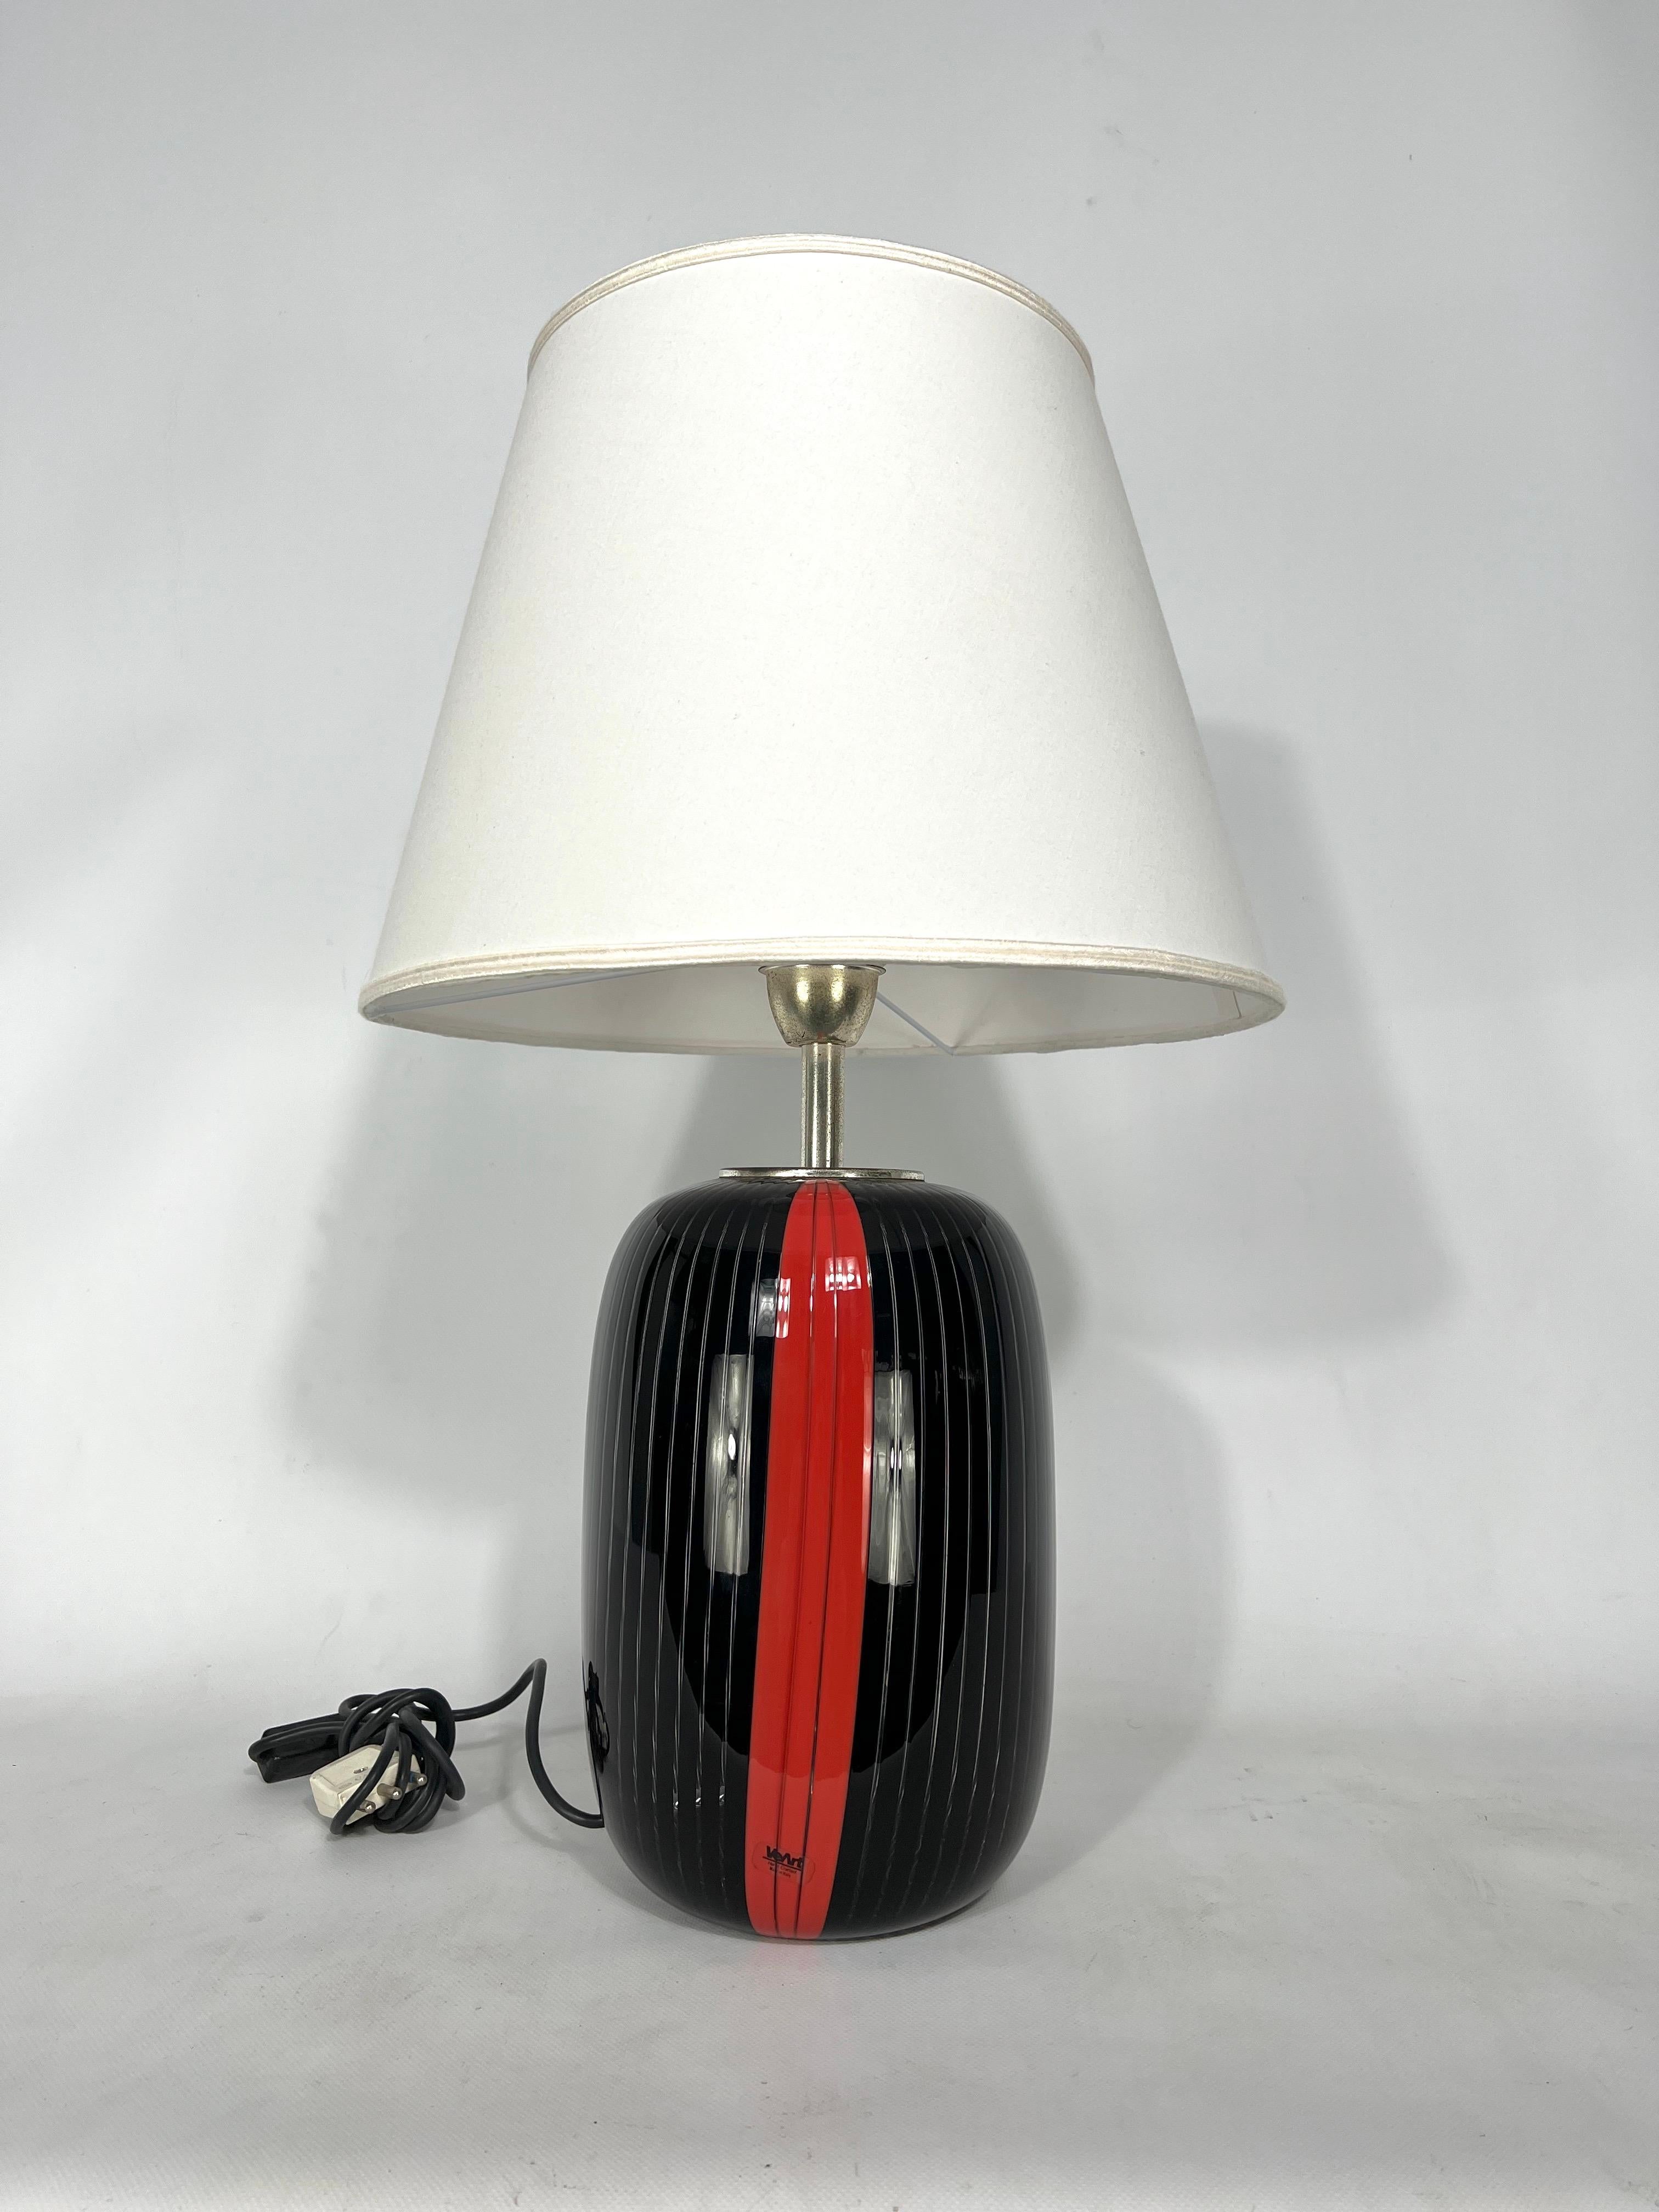 Good vintage condition with trace of age and use for this table lamp produced in Italy during the 70s by VeArt. Oxidation on the metal parts. Labeled. It mounts one socket for E27 lamp. Full working with EU standard, adaptable on demand for USA